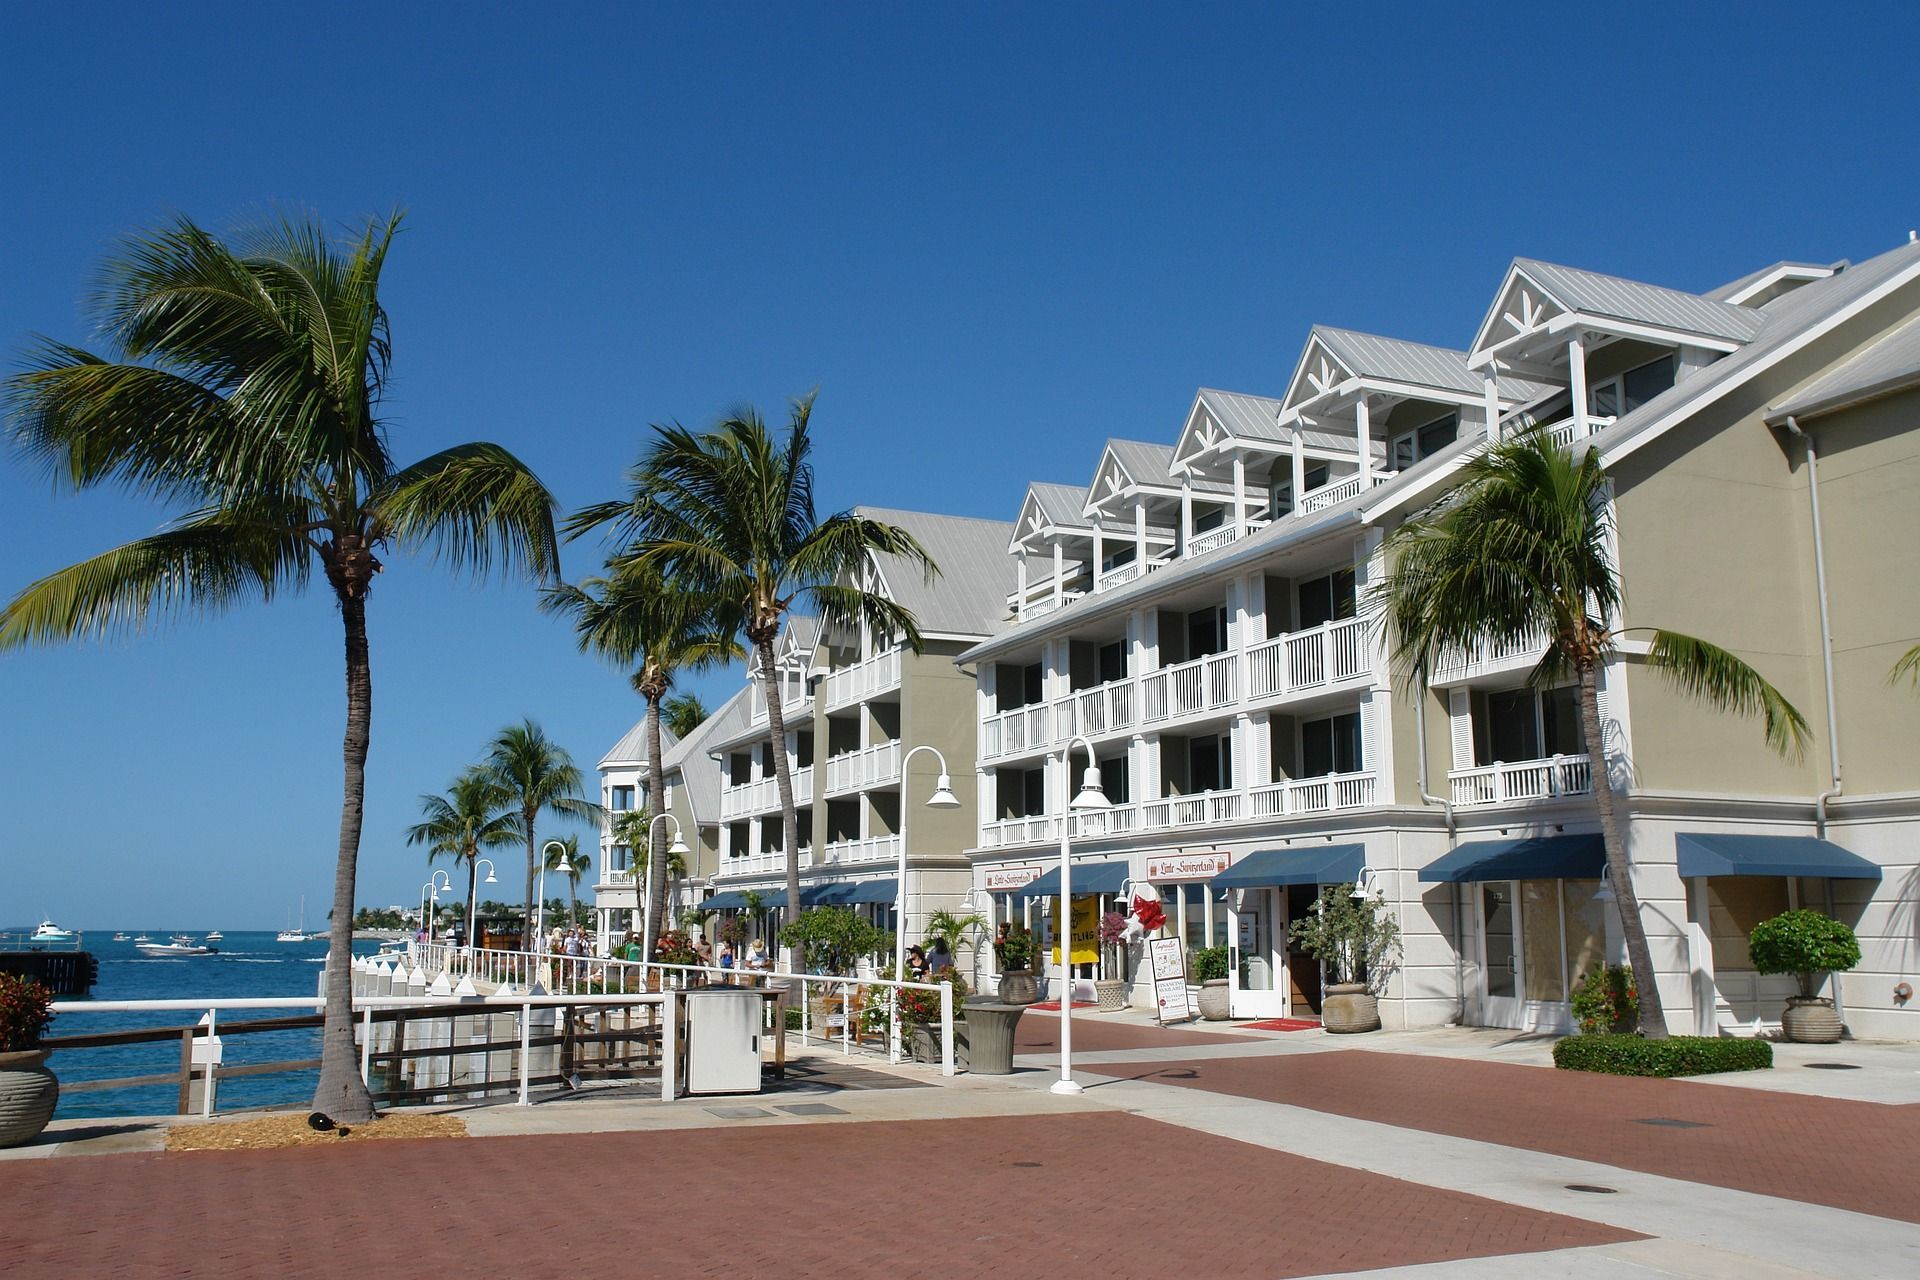 Key West Resort - Find An Inexpensive Hotel Room